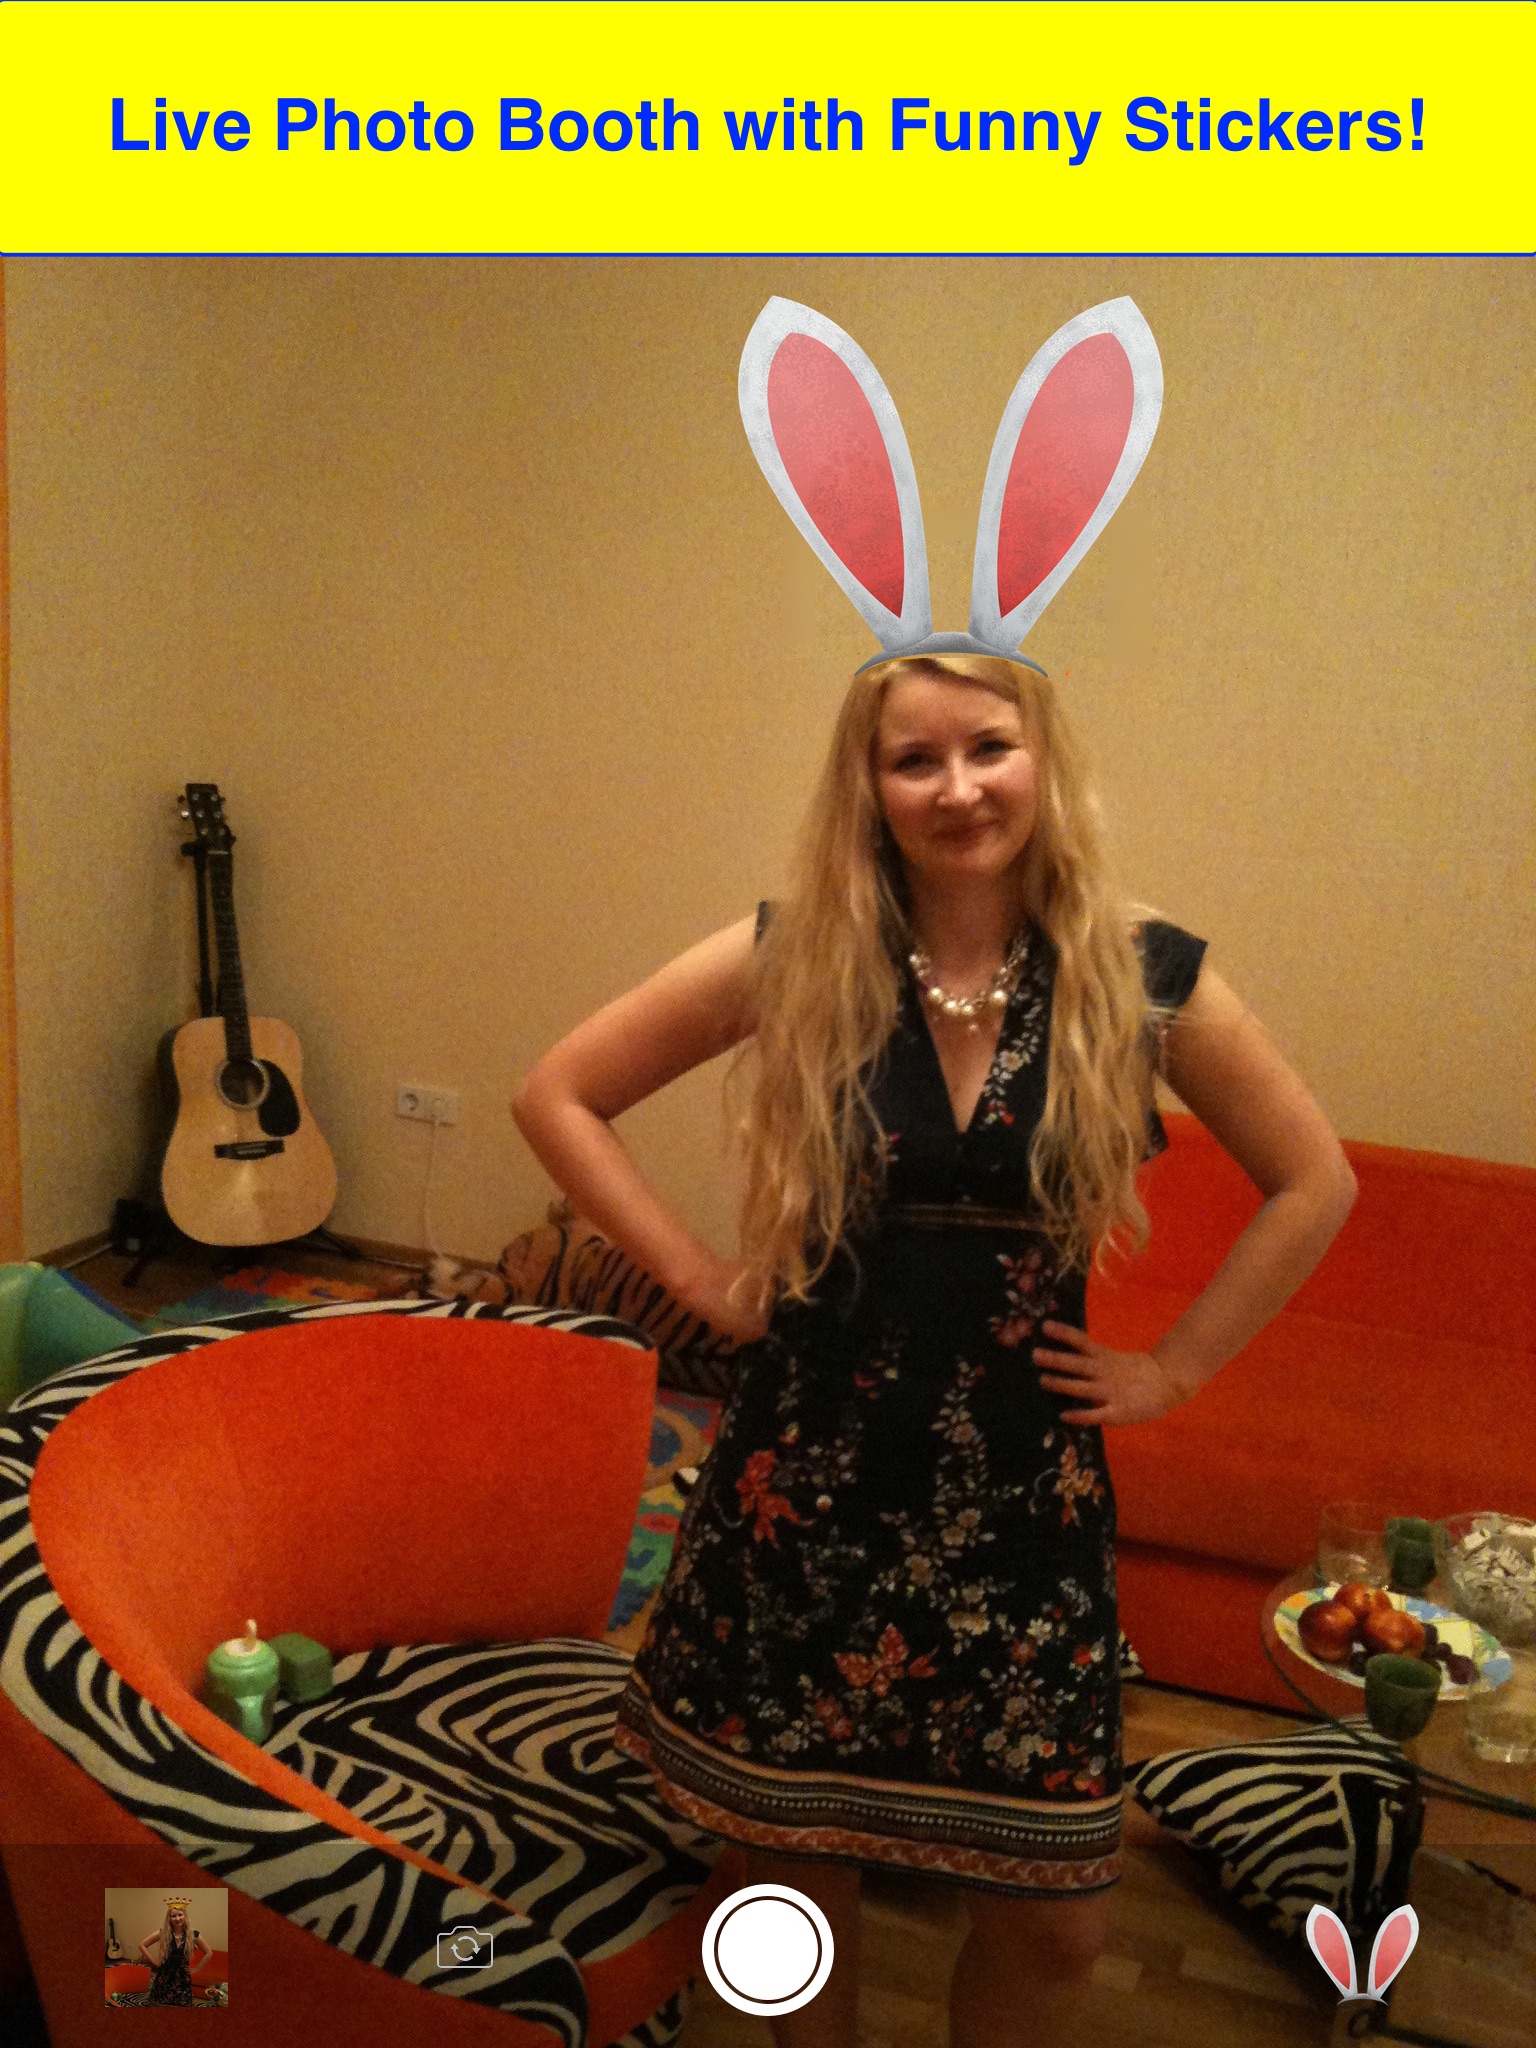 Stickers Photo Booth: Try Antlers and Bunny Ears! screenshot 2